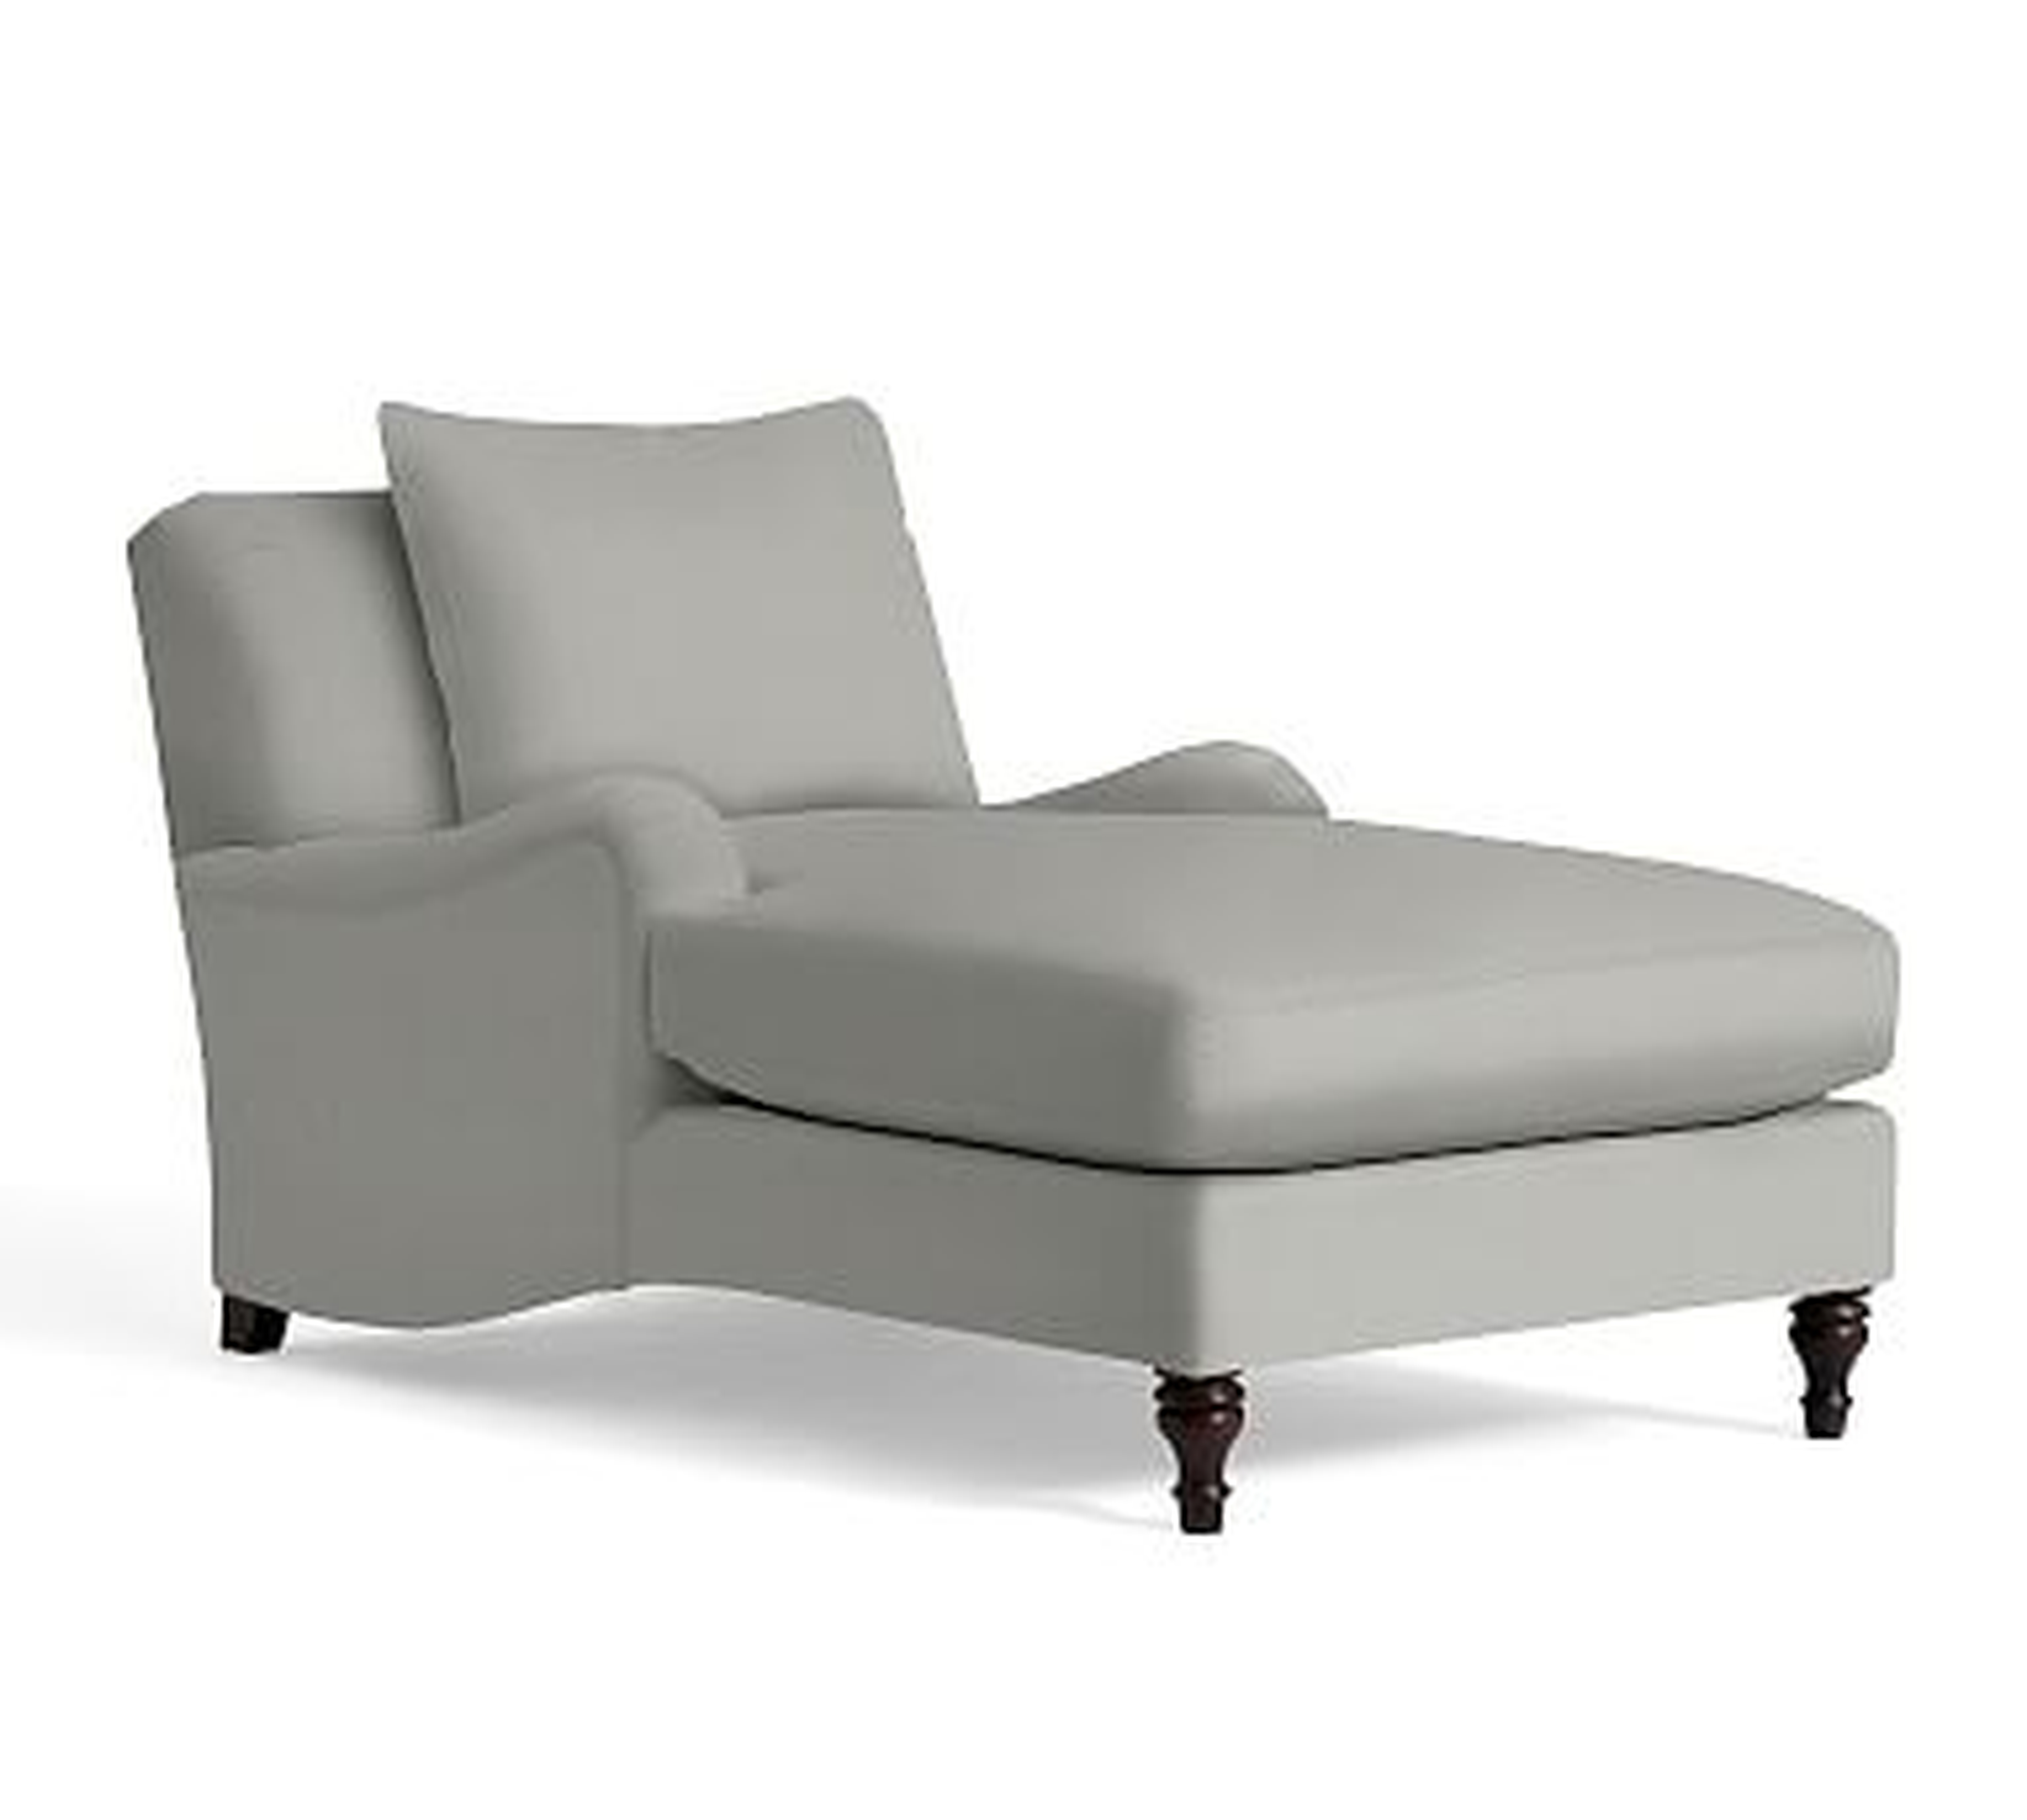 Carlisle English Arm Upholstered Chaise Lounge, Polyester Wrapped Cushions, Performance Everydaysuede(TM) Metal Gray - Pottery Barn